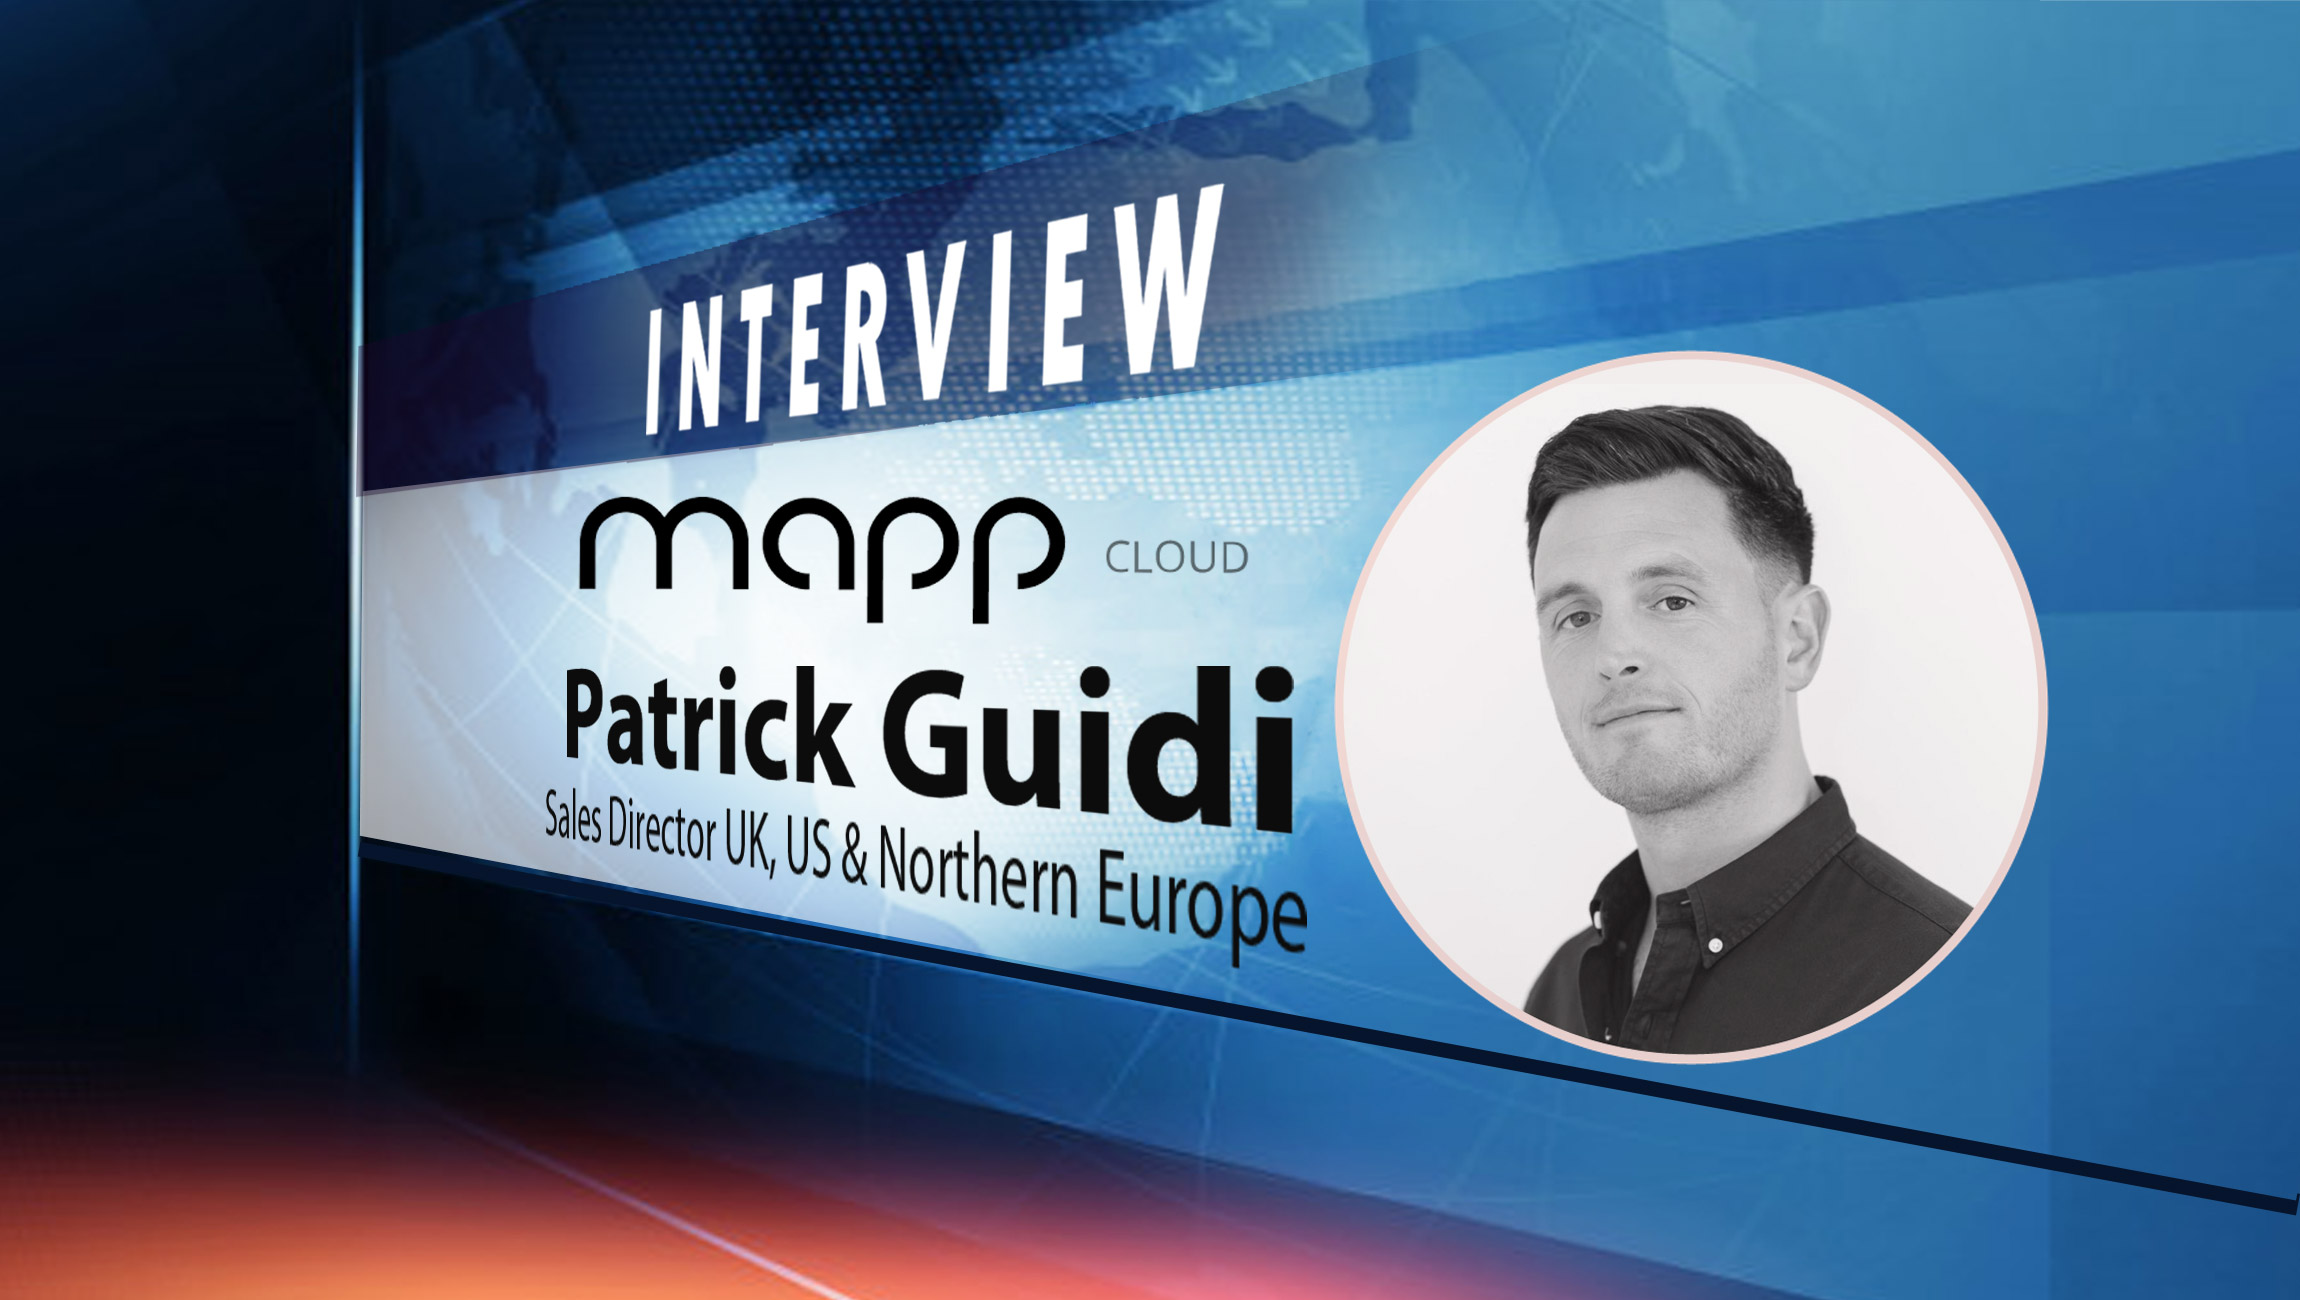 SalesTechStar Interview with Patrick Guidi, Sales Director UK, US & Northern Europe at Mapp Digital